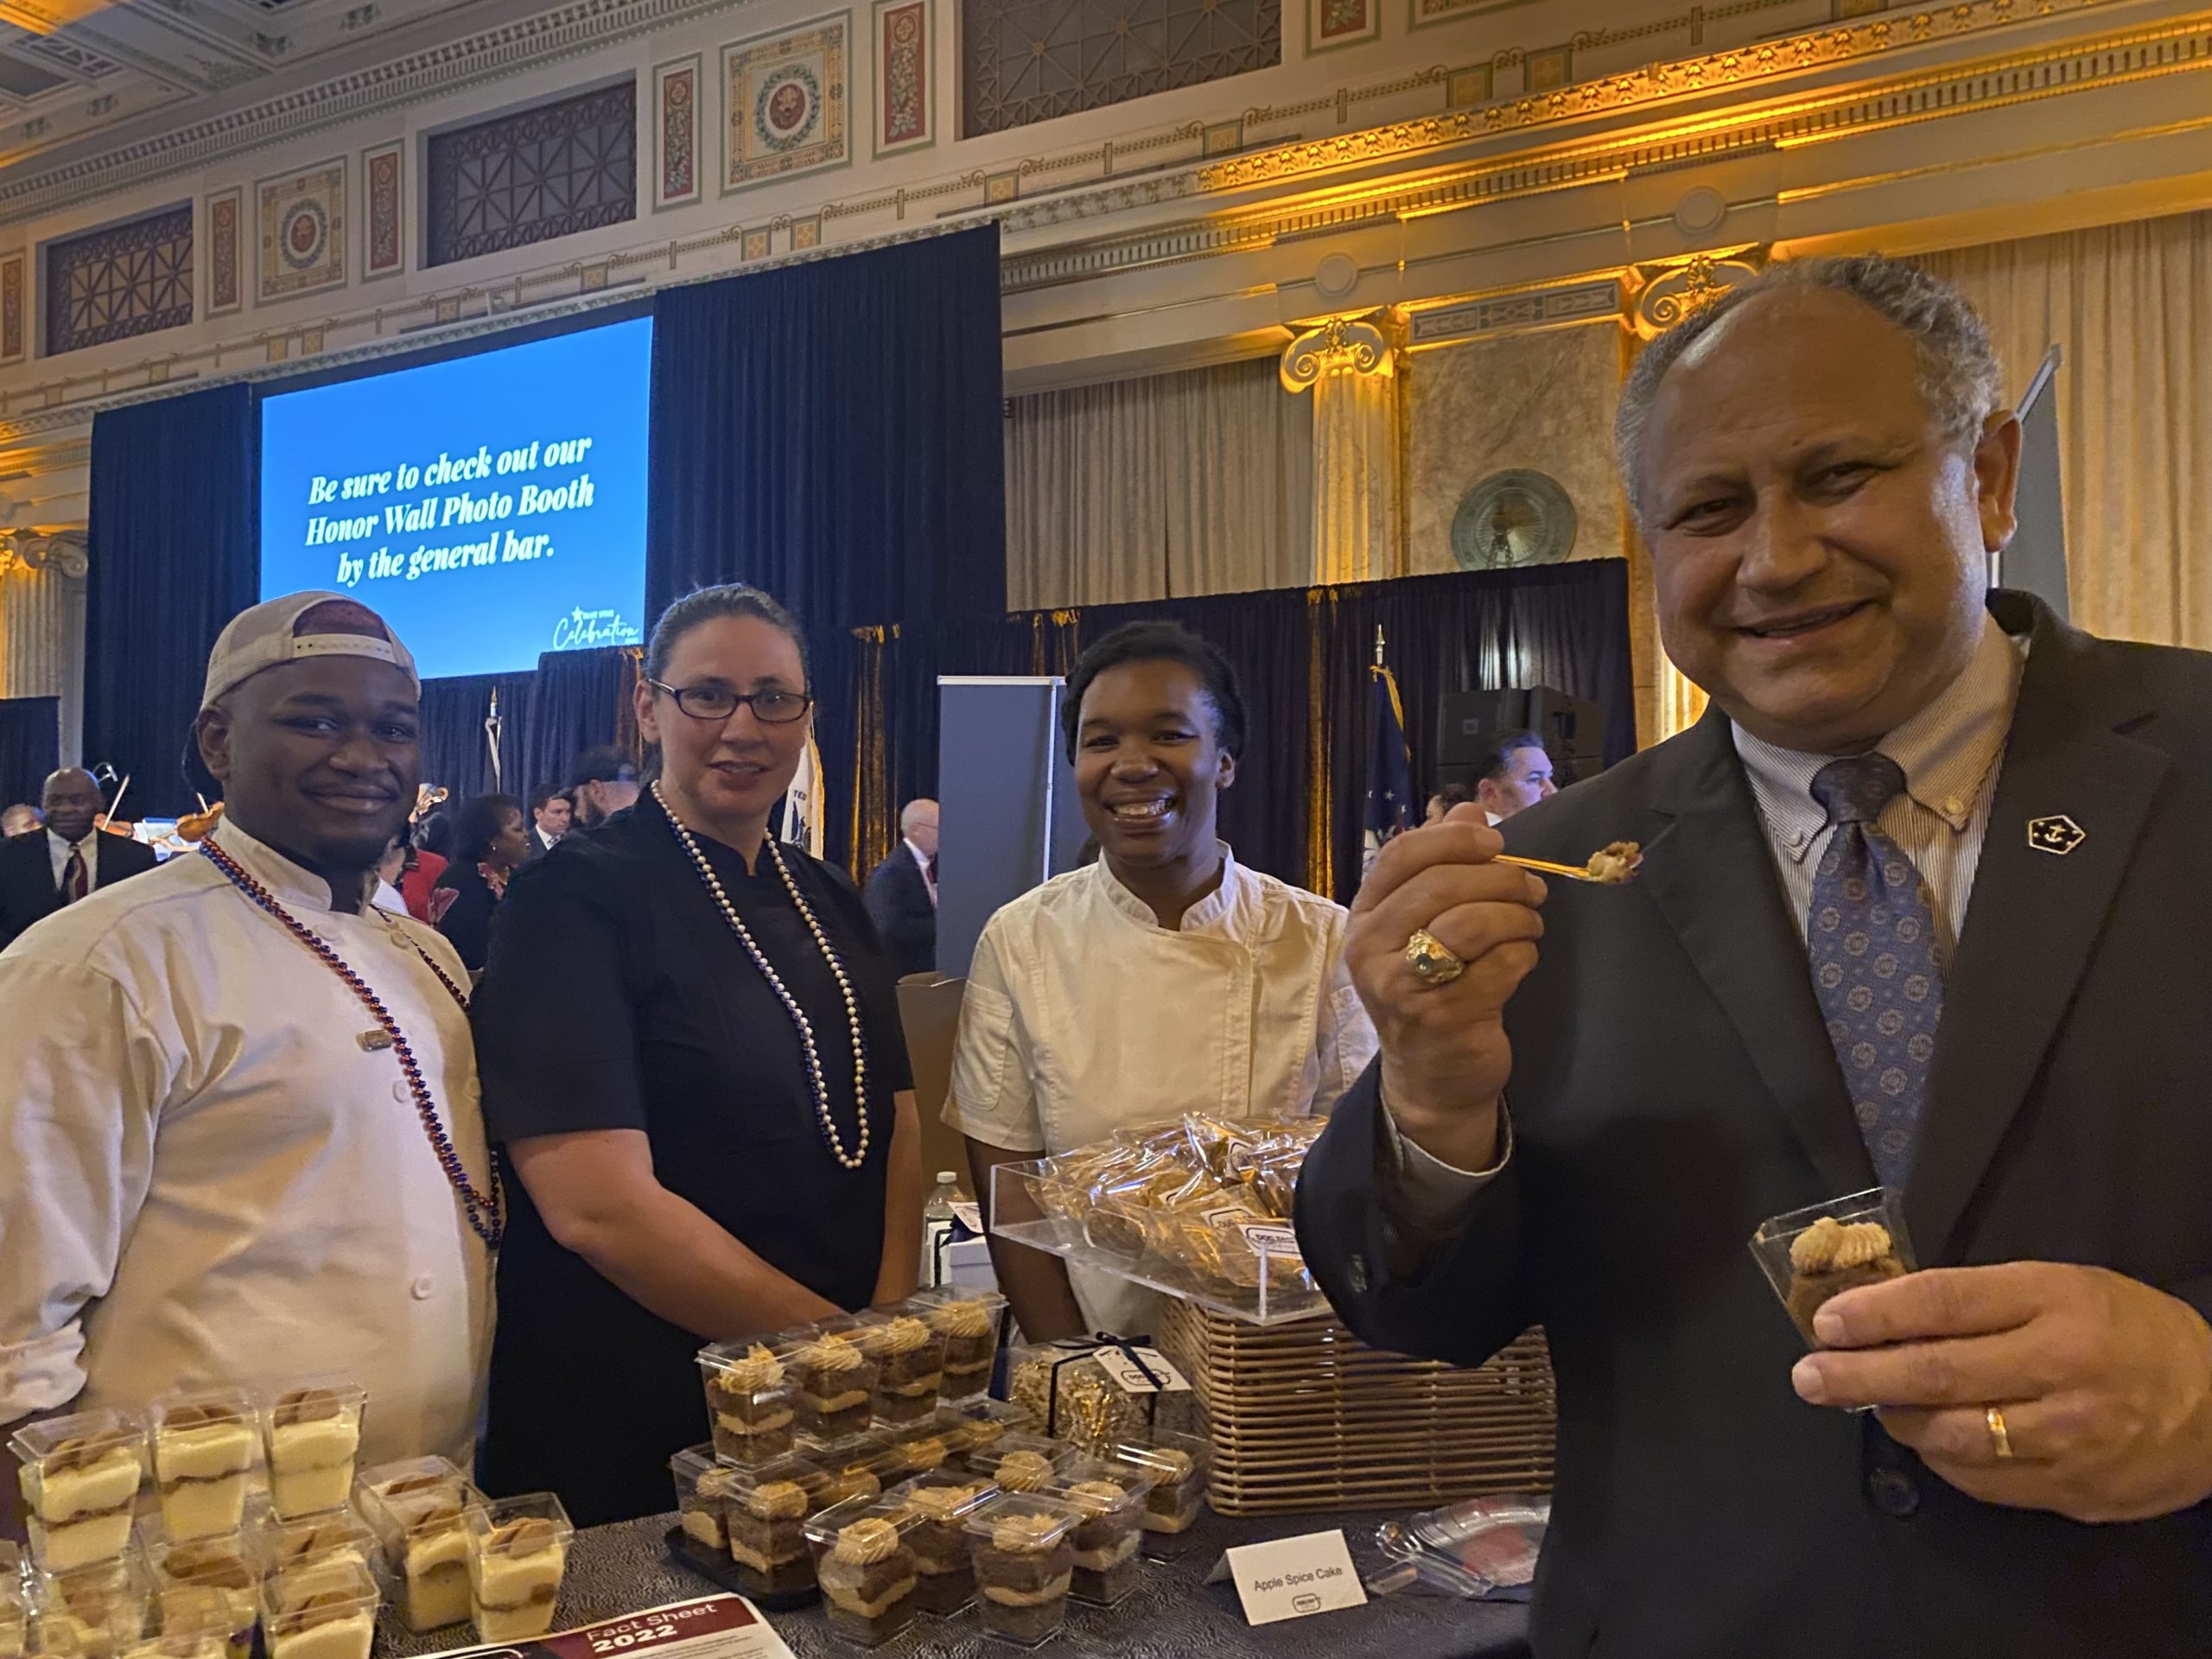 Secretary of the Navy, Carlos Del Toro, poses in front of the Dog Tag Bakery table, sampling a dessert.